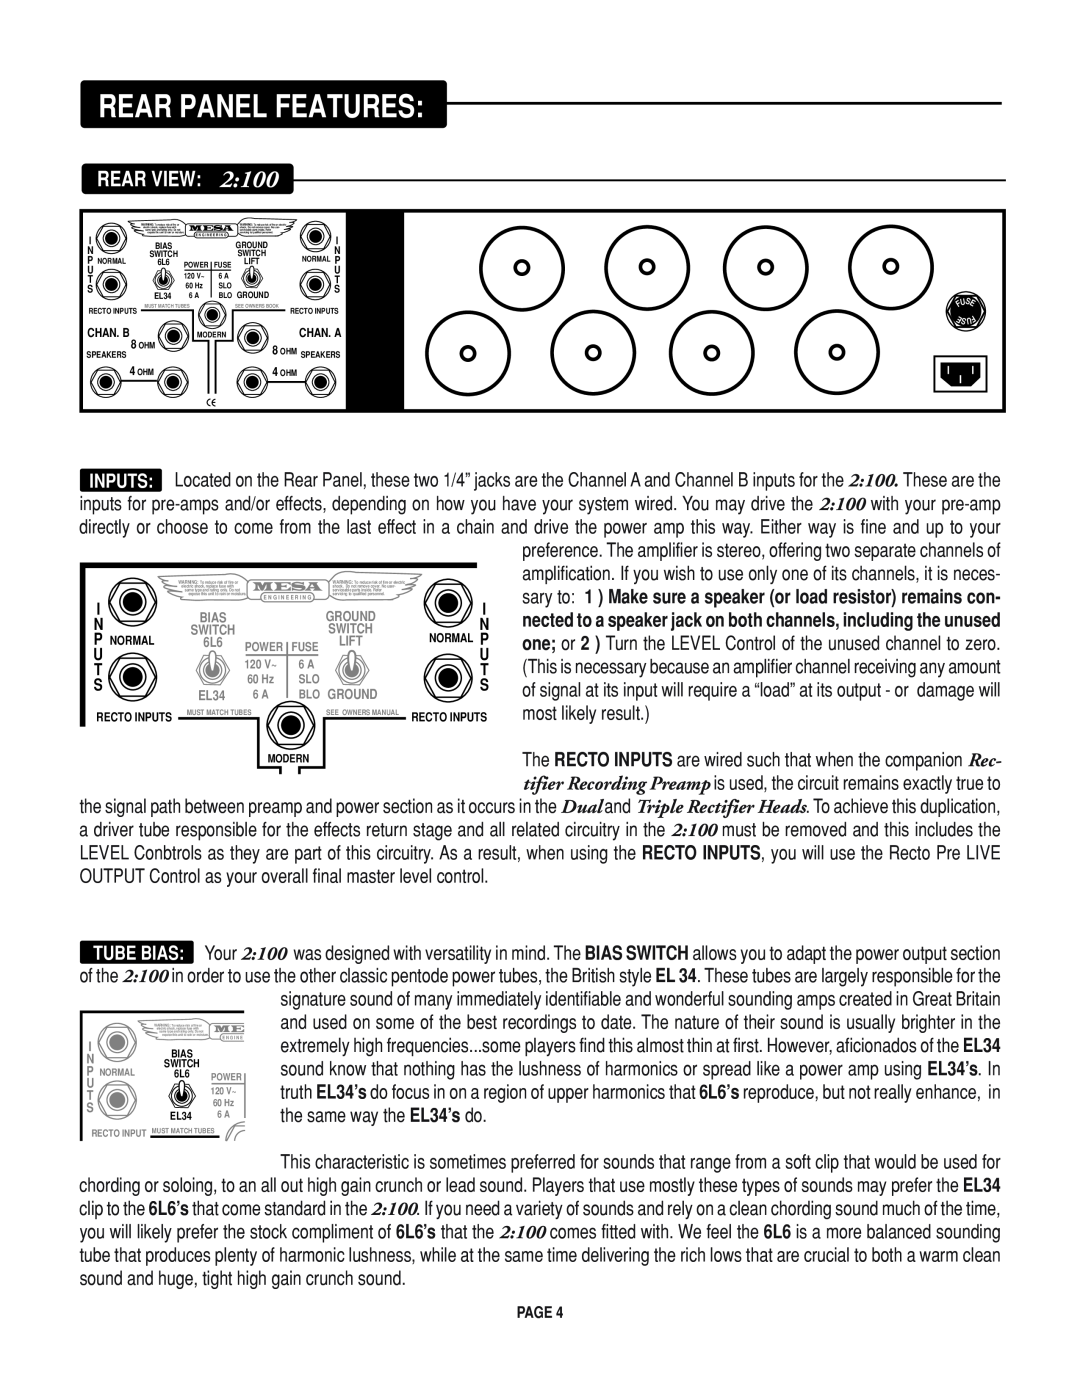 Mesa/Boogie Rectifier Stereo owner manual Rear Panel Features, Rear View, most likely result 